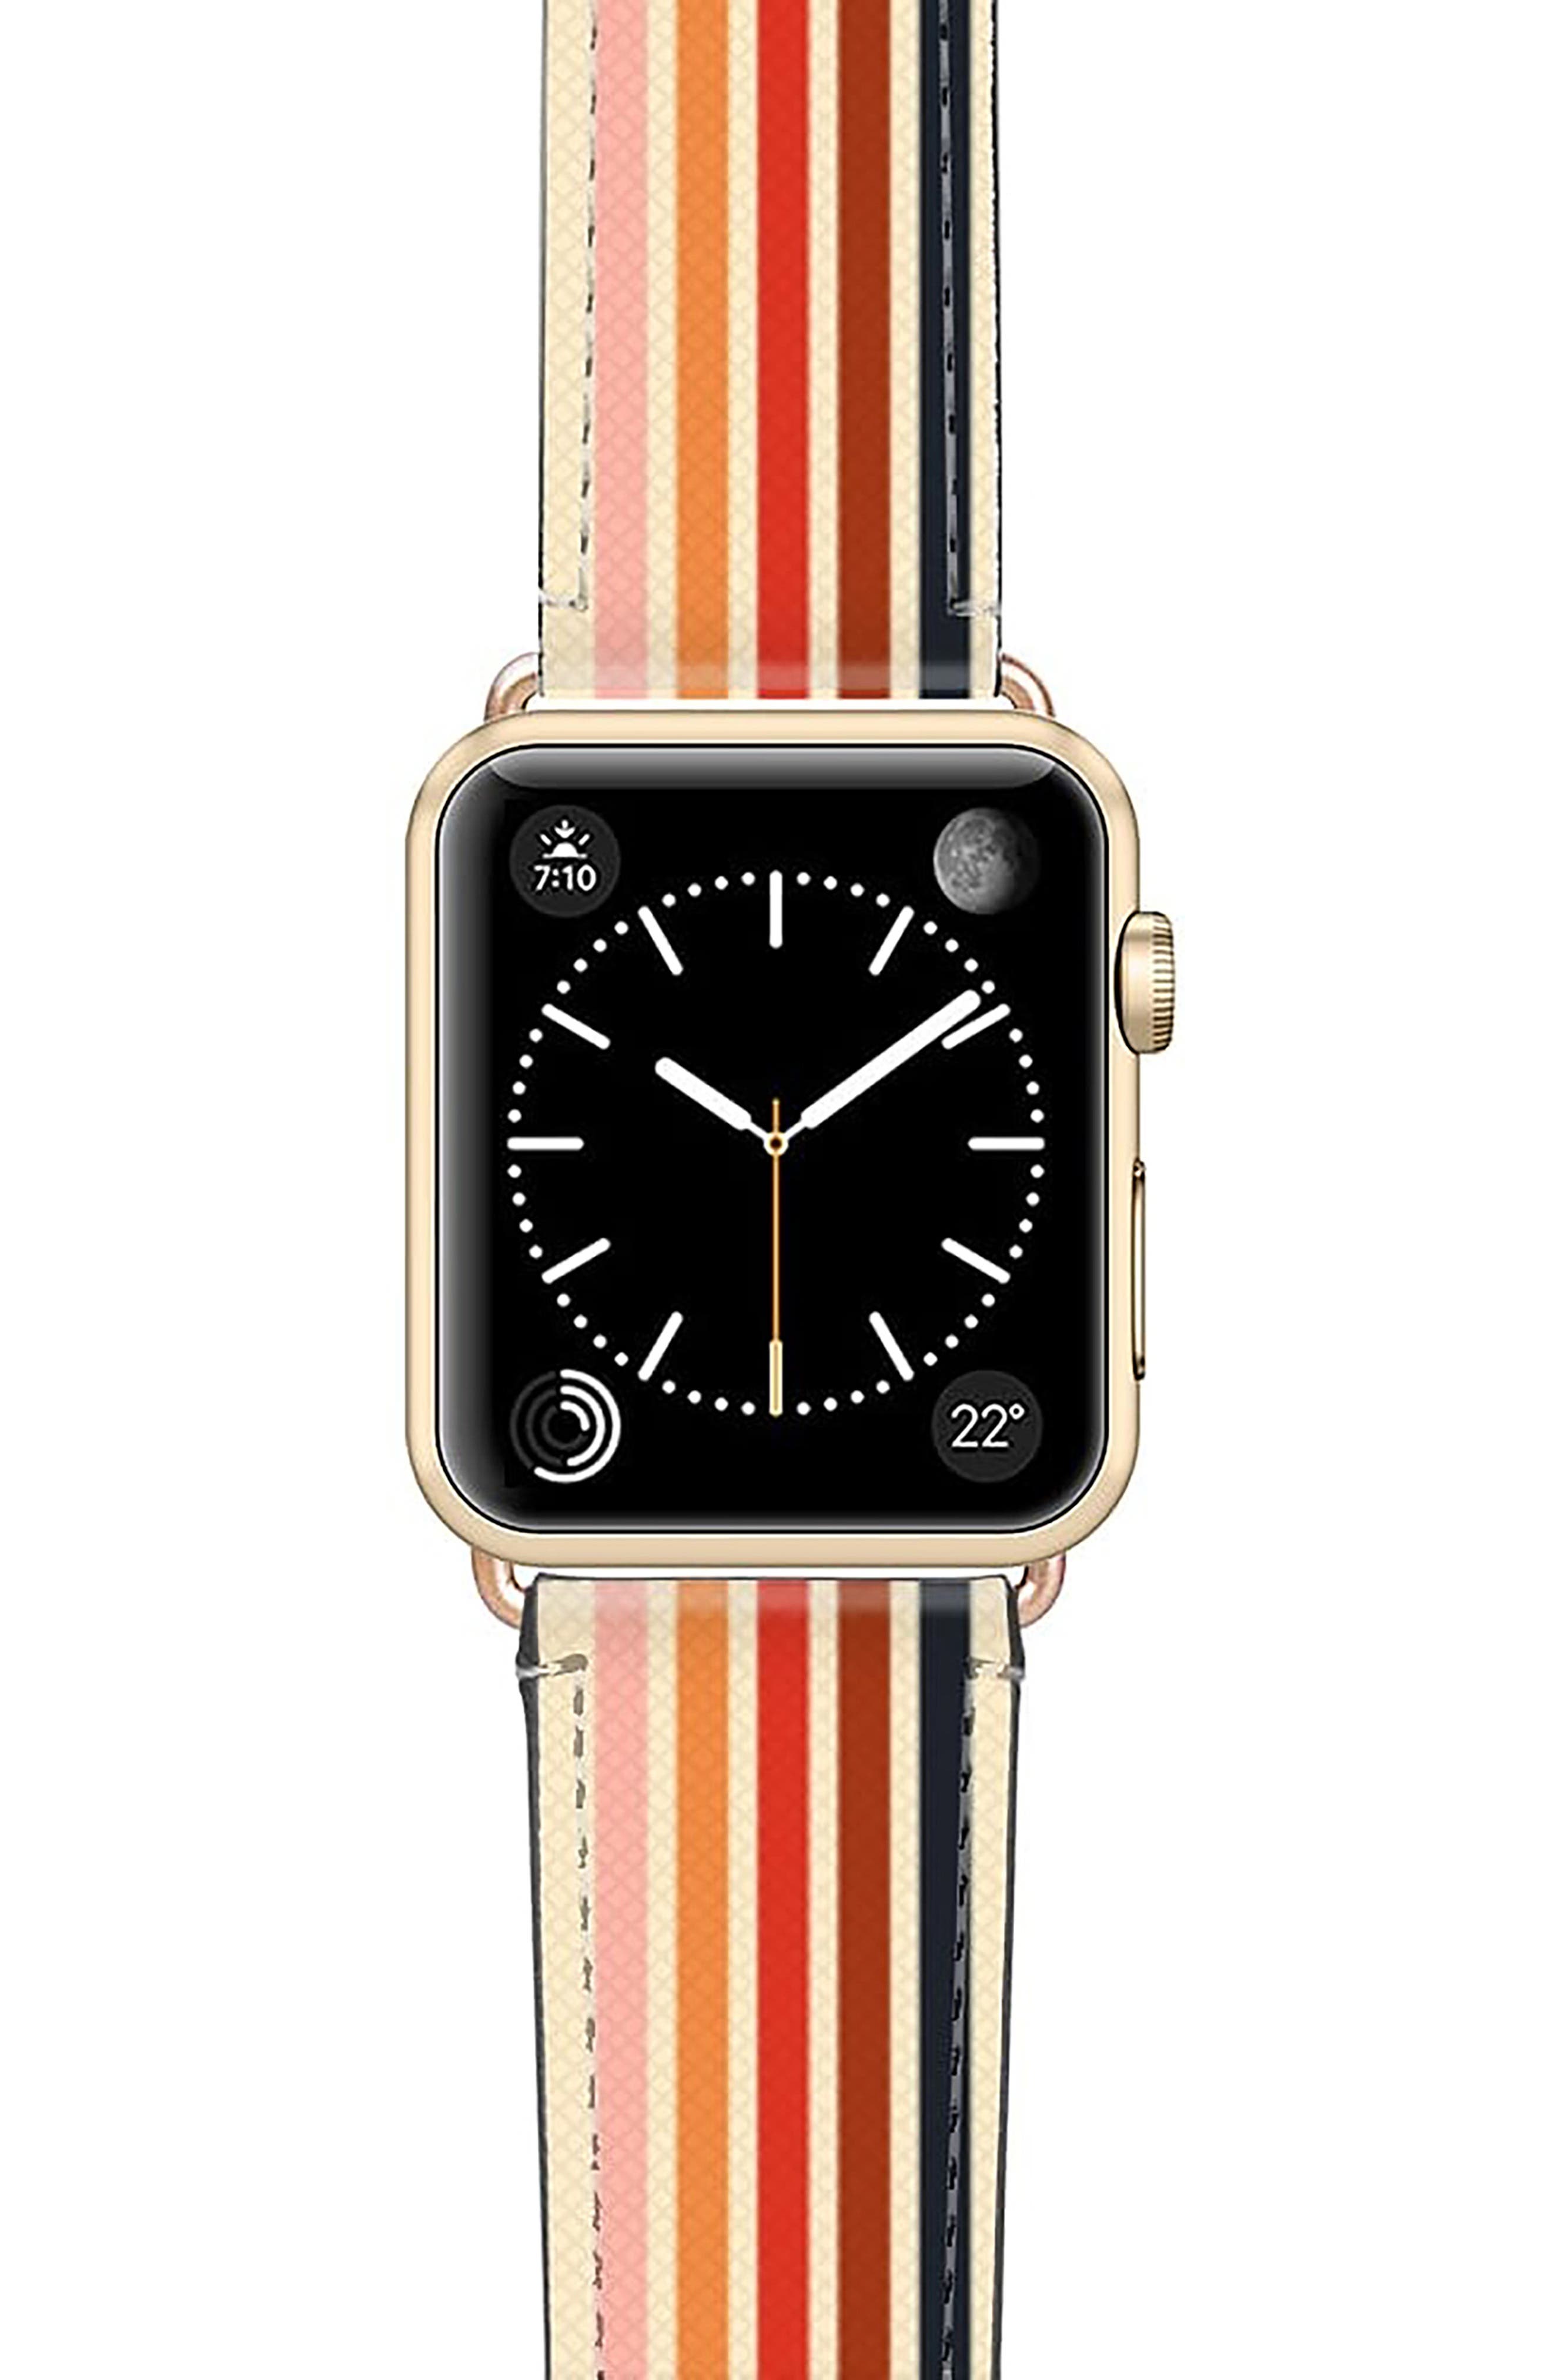 CASETiFY Retro Saffiano Faux Leather Apple Watch Band in Gold at Nordstrom